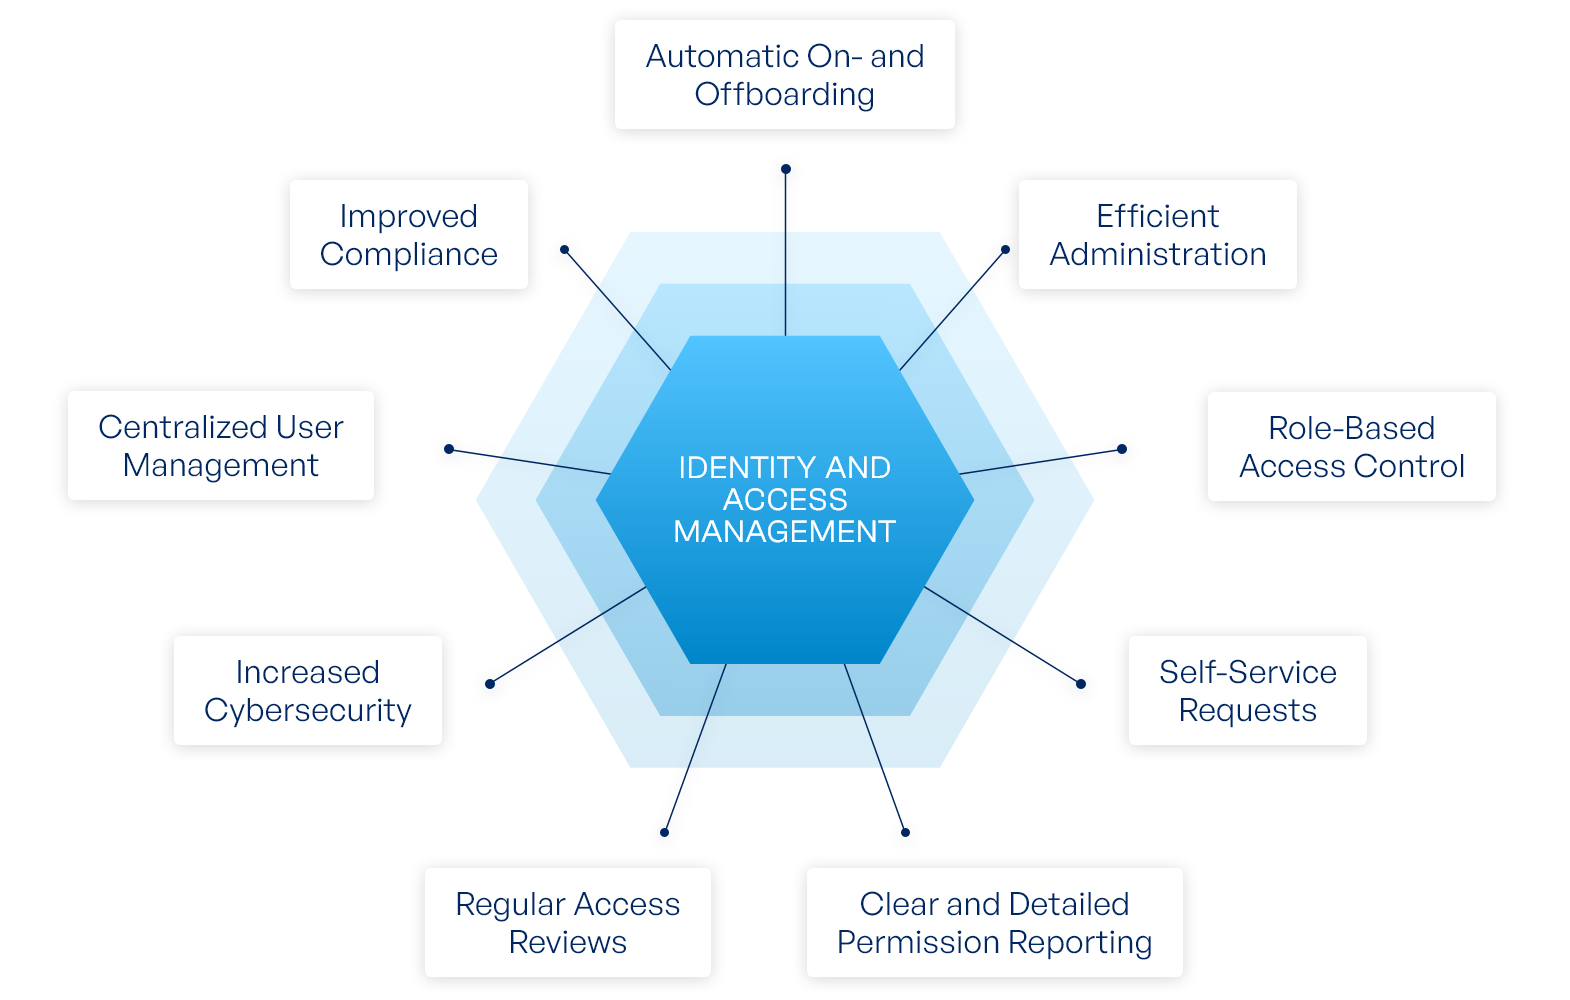 Key Features to Look for in an Identity and Access Management System